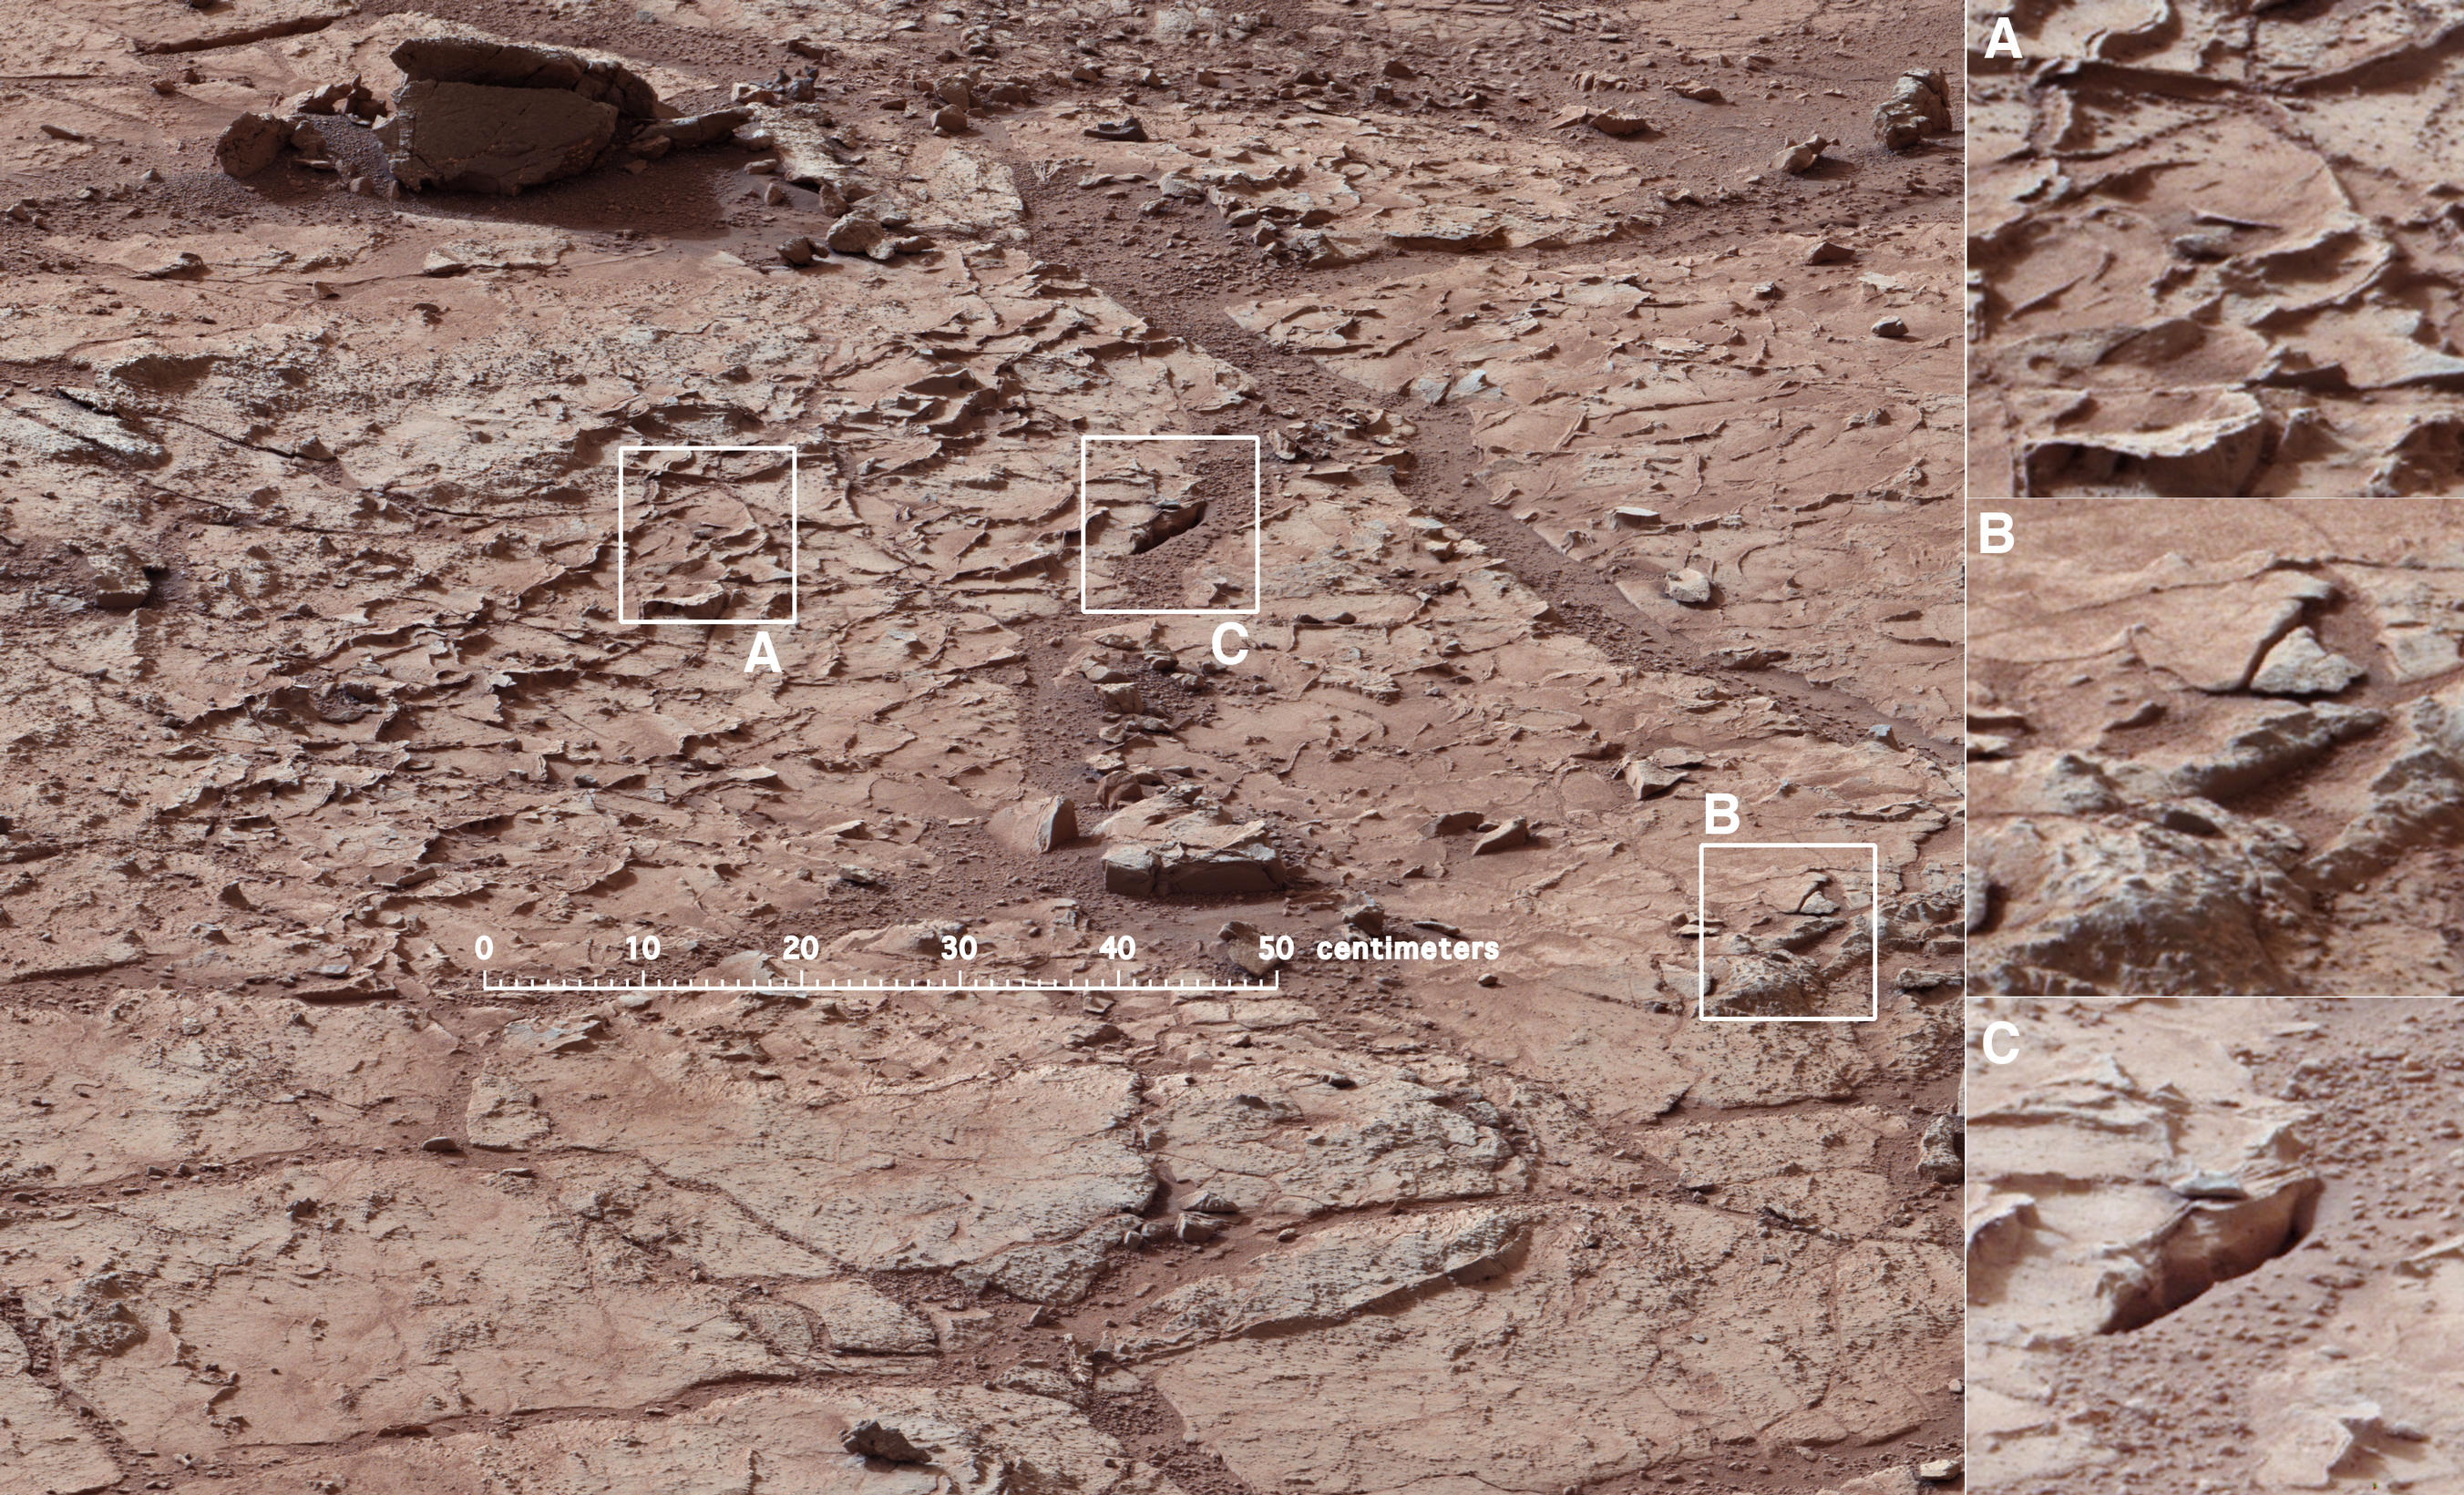 'John Klein' Site Selected for Curiosity's Drill Debut